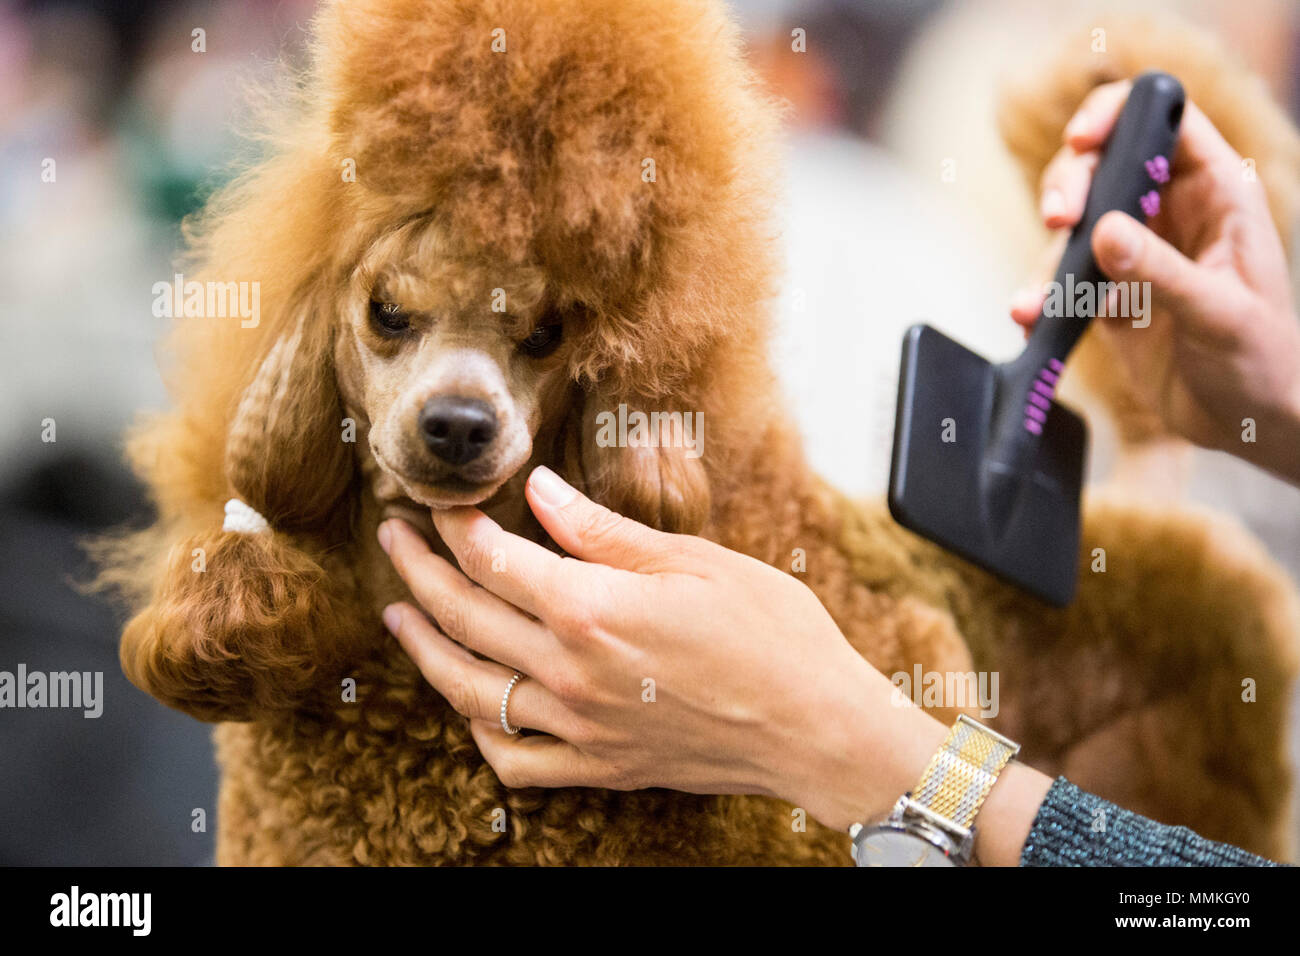 Show Hund High Resolution Stock Photography and Images - Alamy